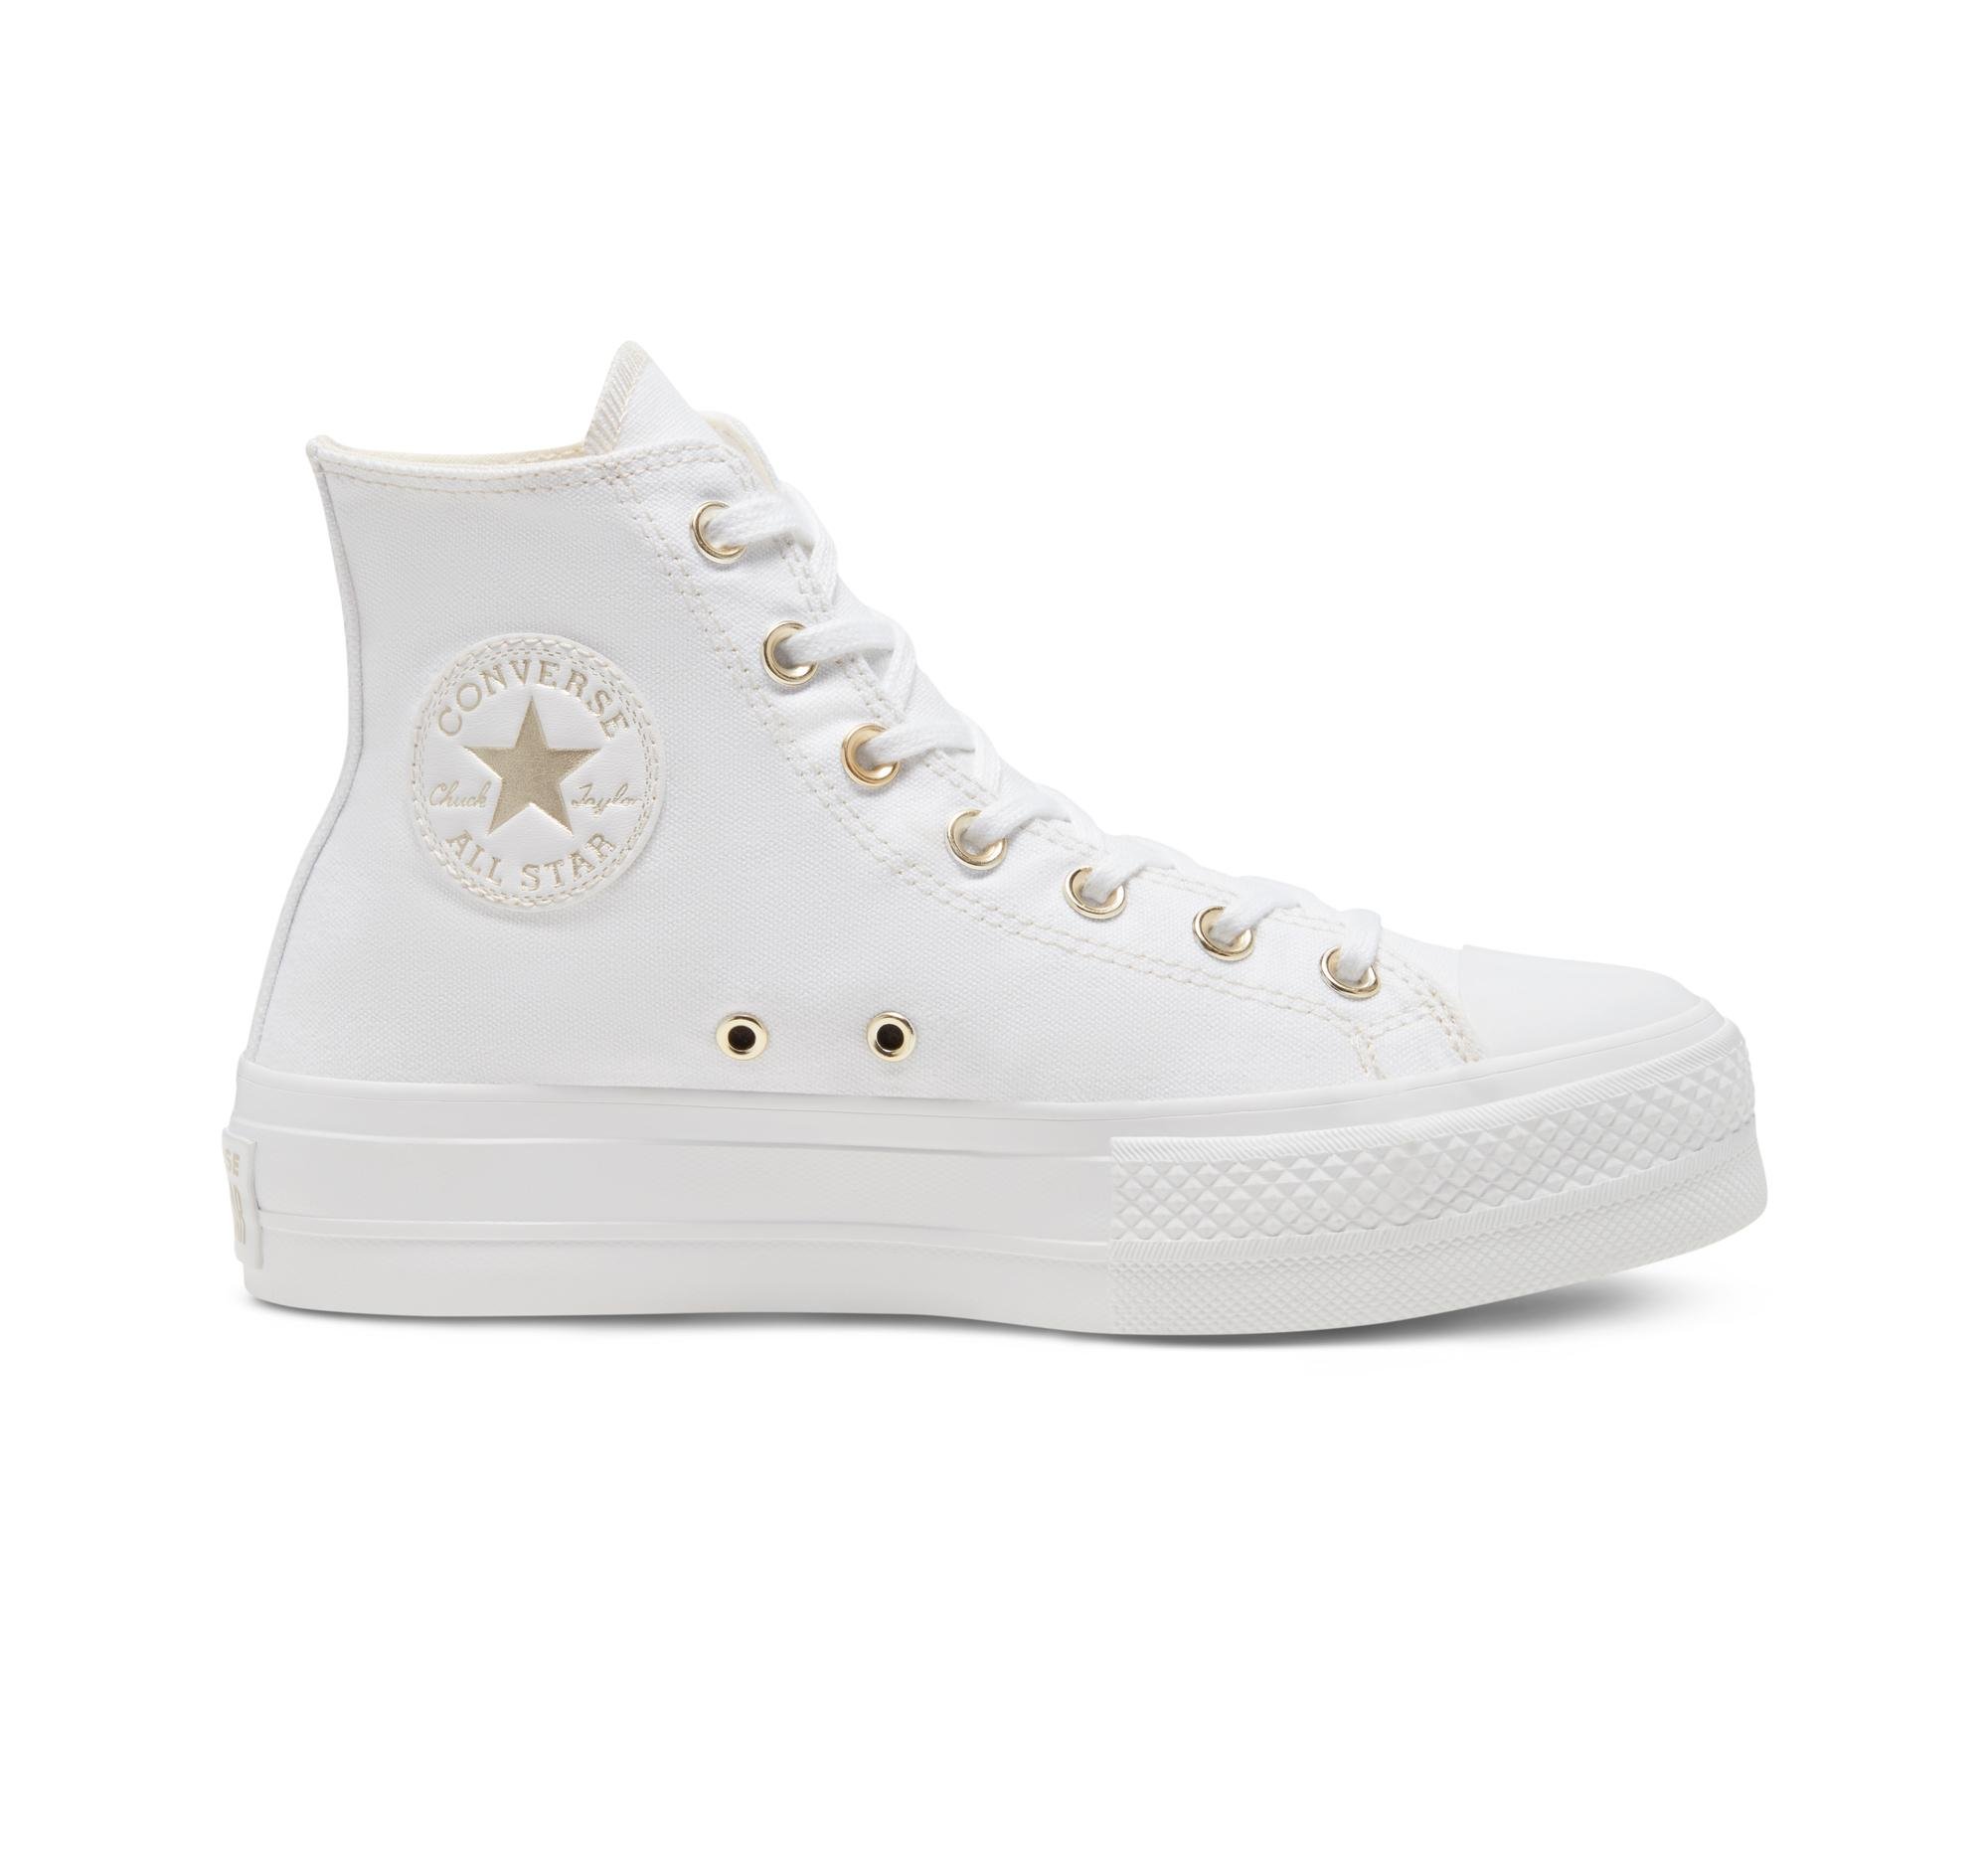 Converse Lace Elevated Gold Platform Chuck Taylor All Star in ... بيتهوفن